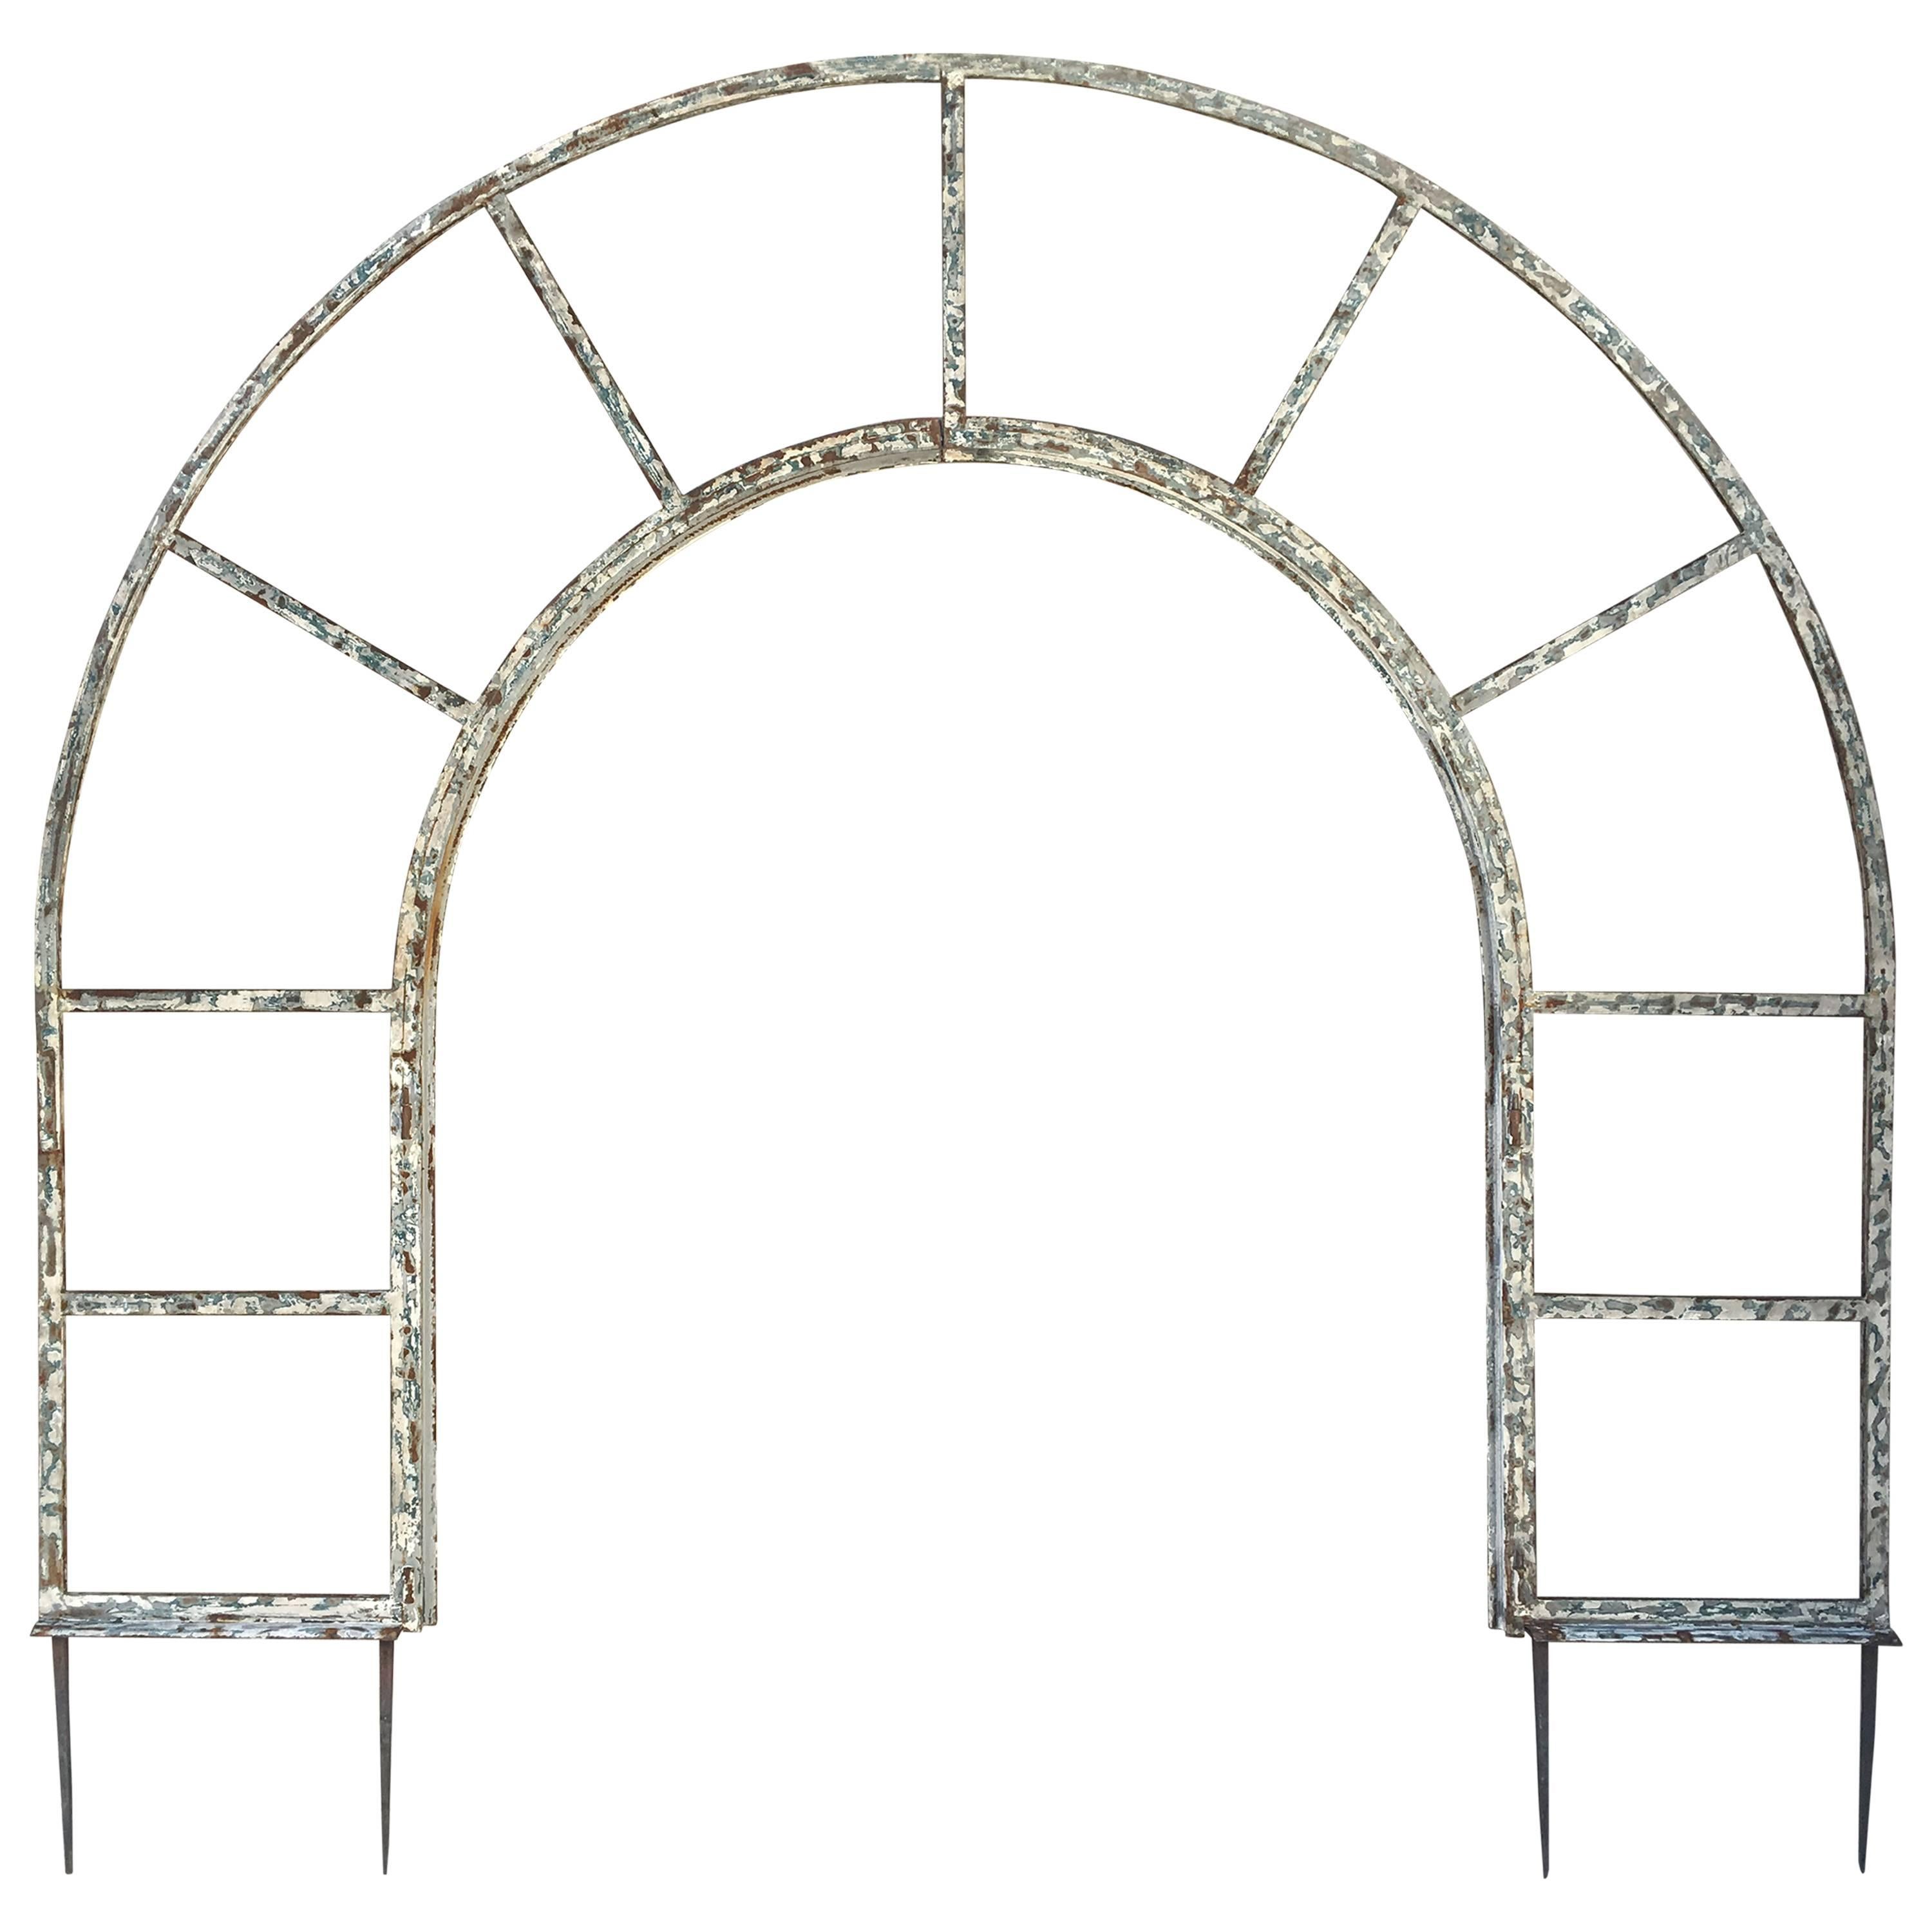 Estate-Sized French Steel Arched Arbor or Trellis